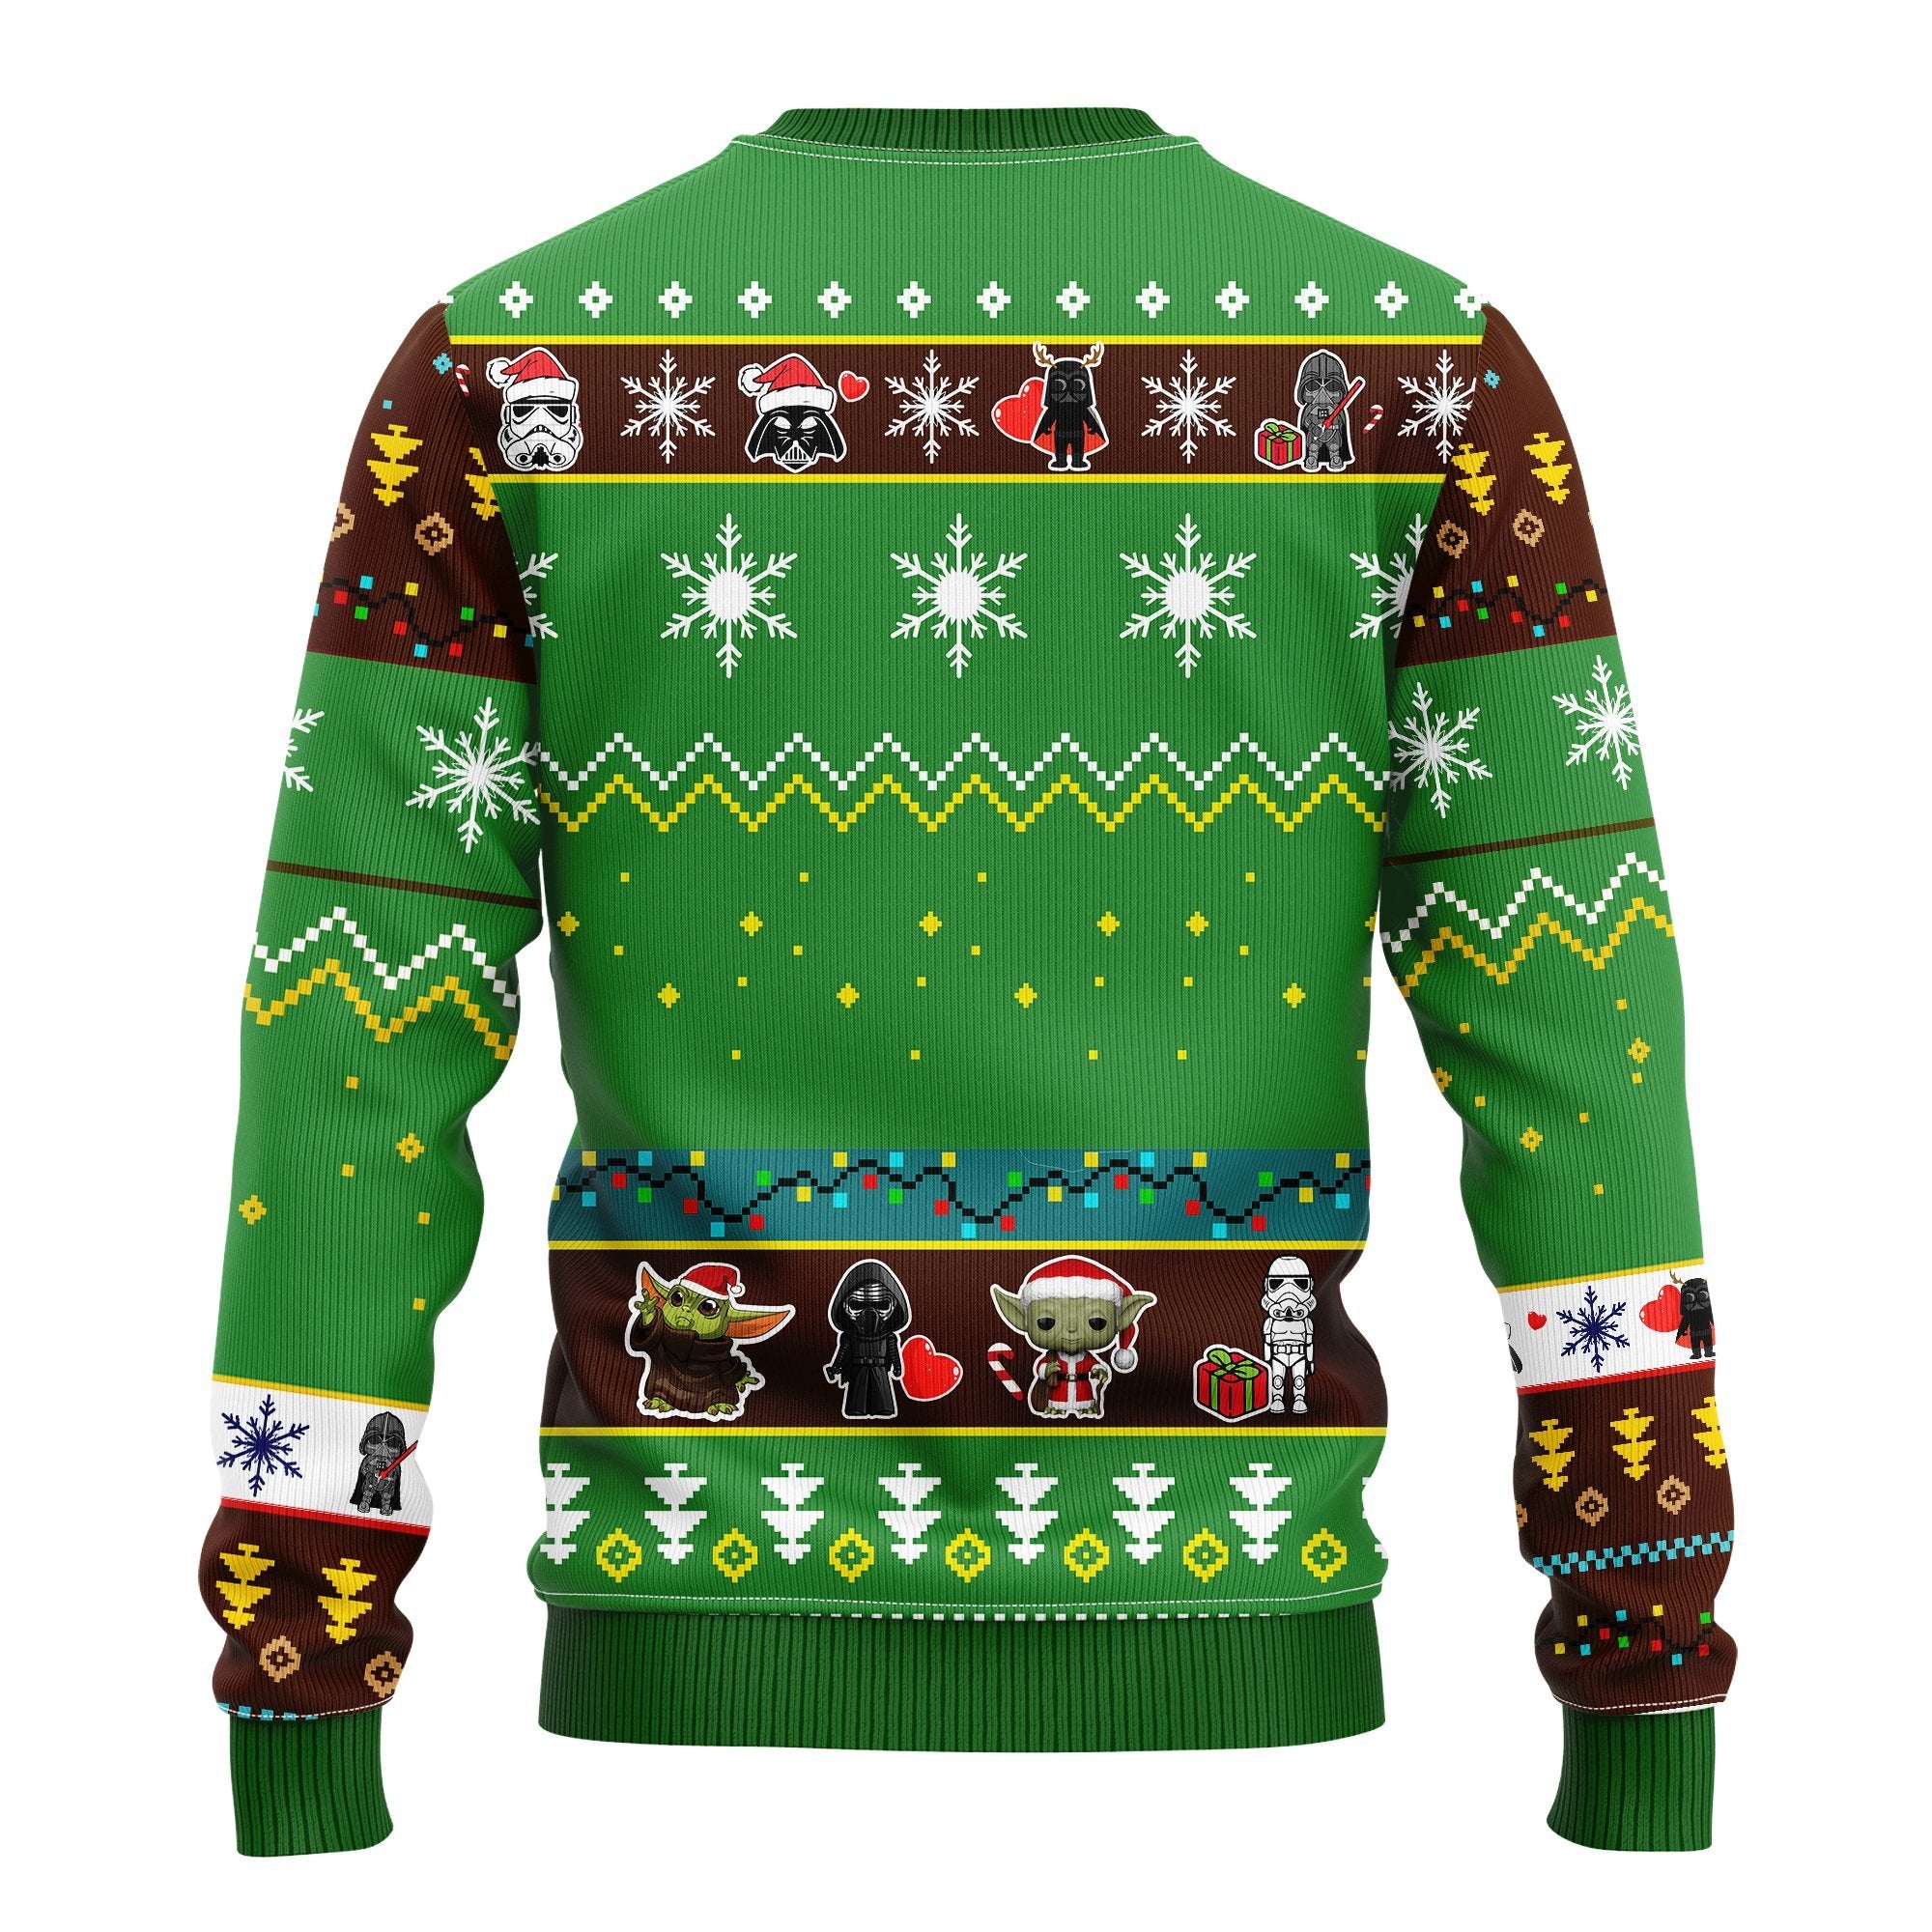 Star Wars Cute Ugly Christmas Sweater Green 1 Amazing Gift Idea Thanksgiving Gift